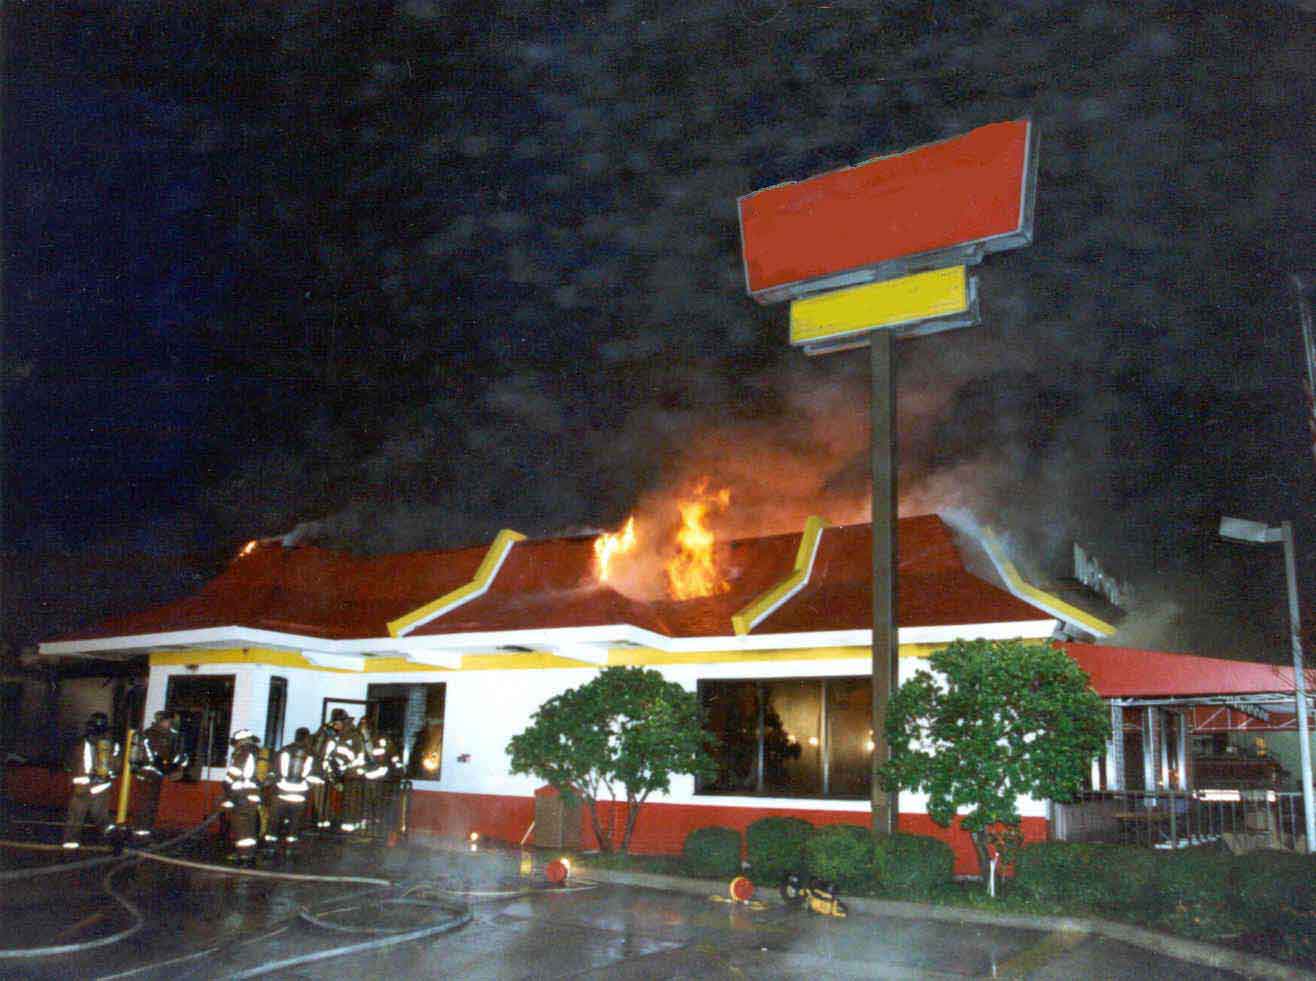 Photo 9: Exterior view of the restaurant fire at the approximate time the roof collapsed.